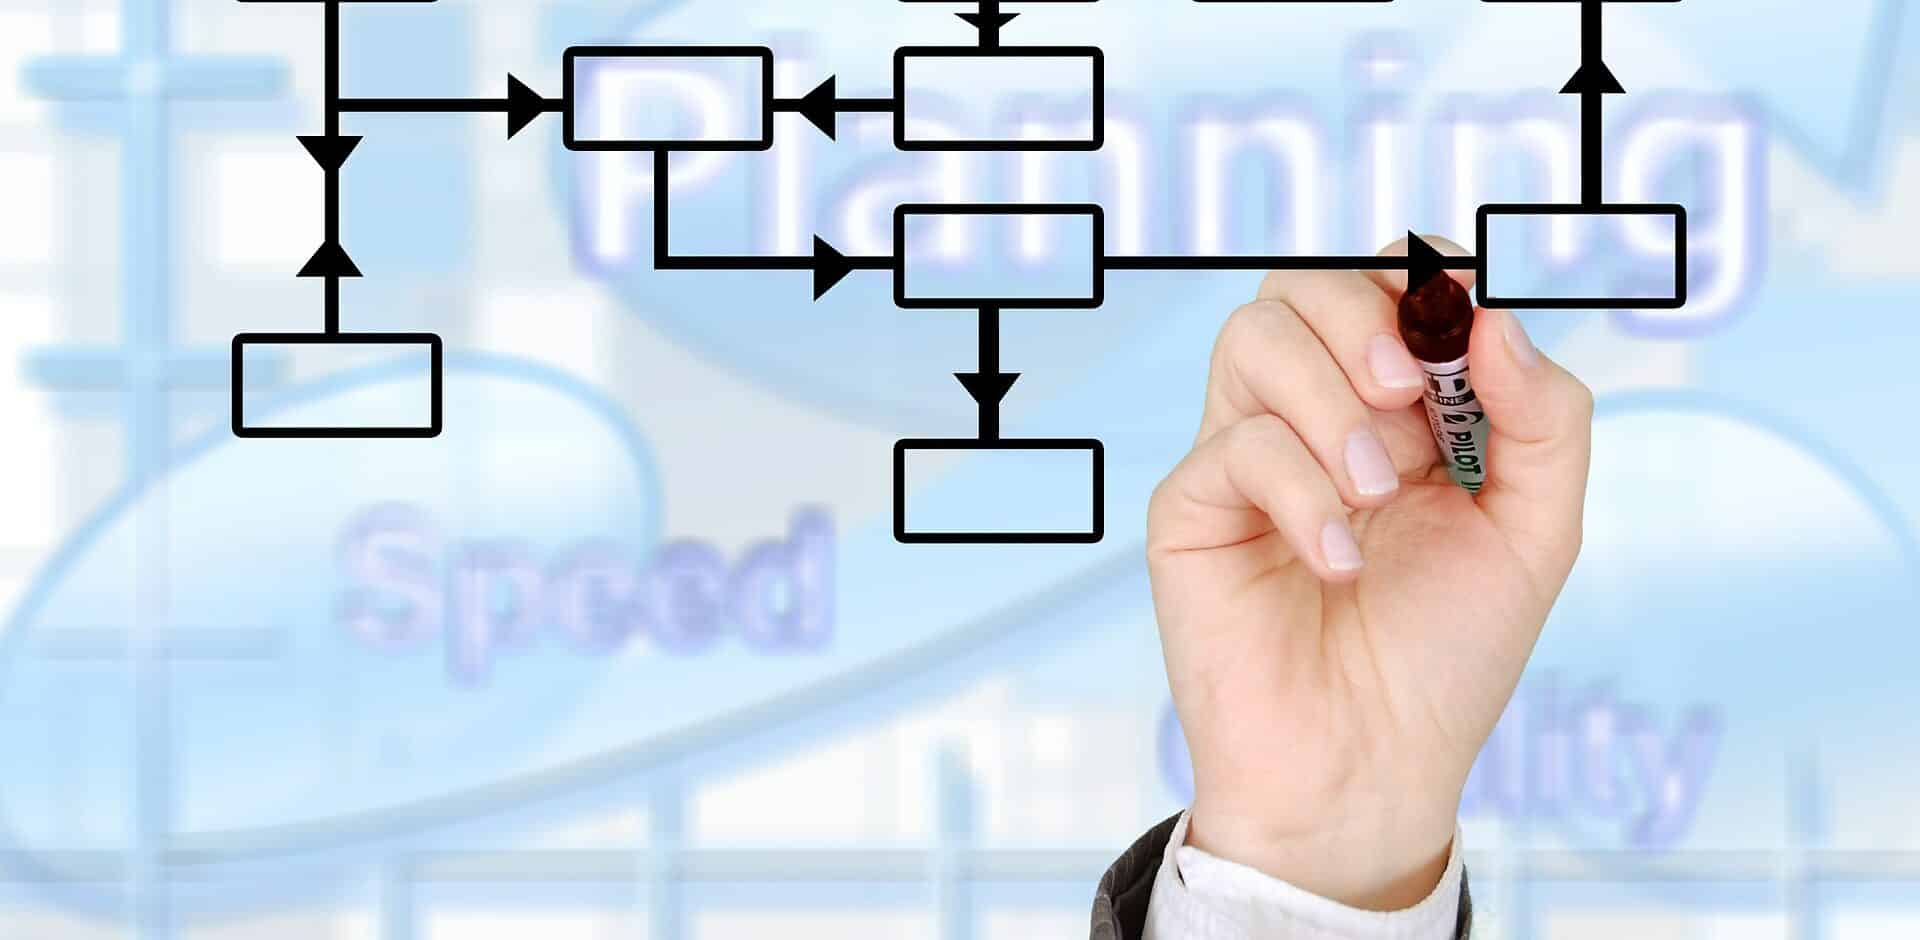 business process modelling tools